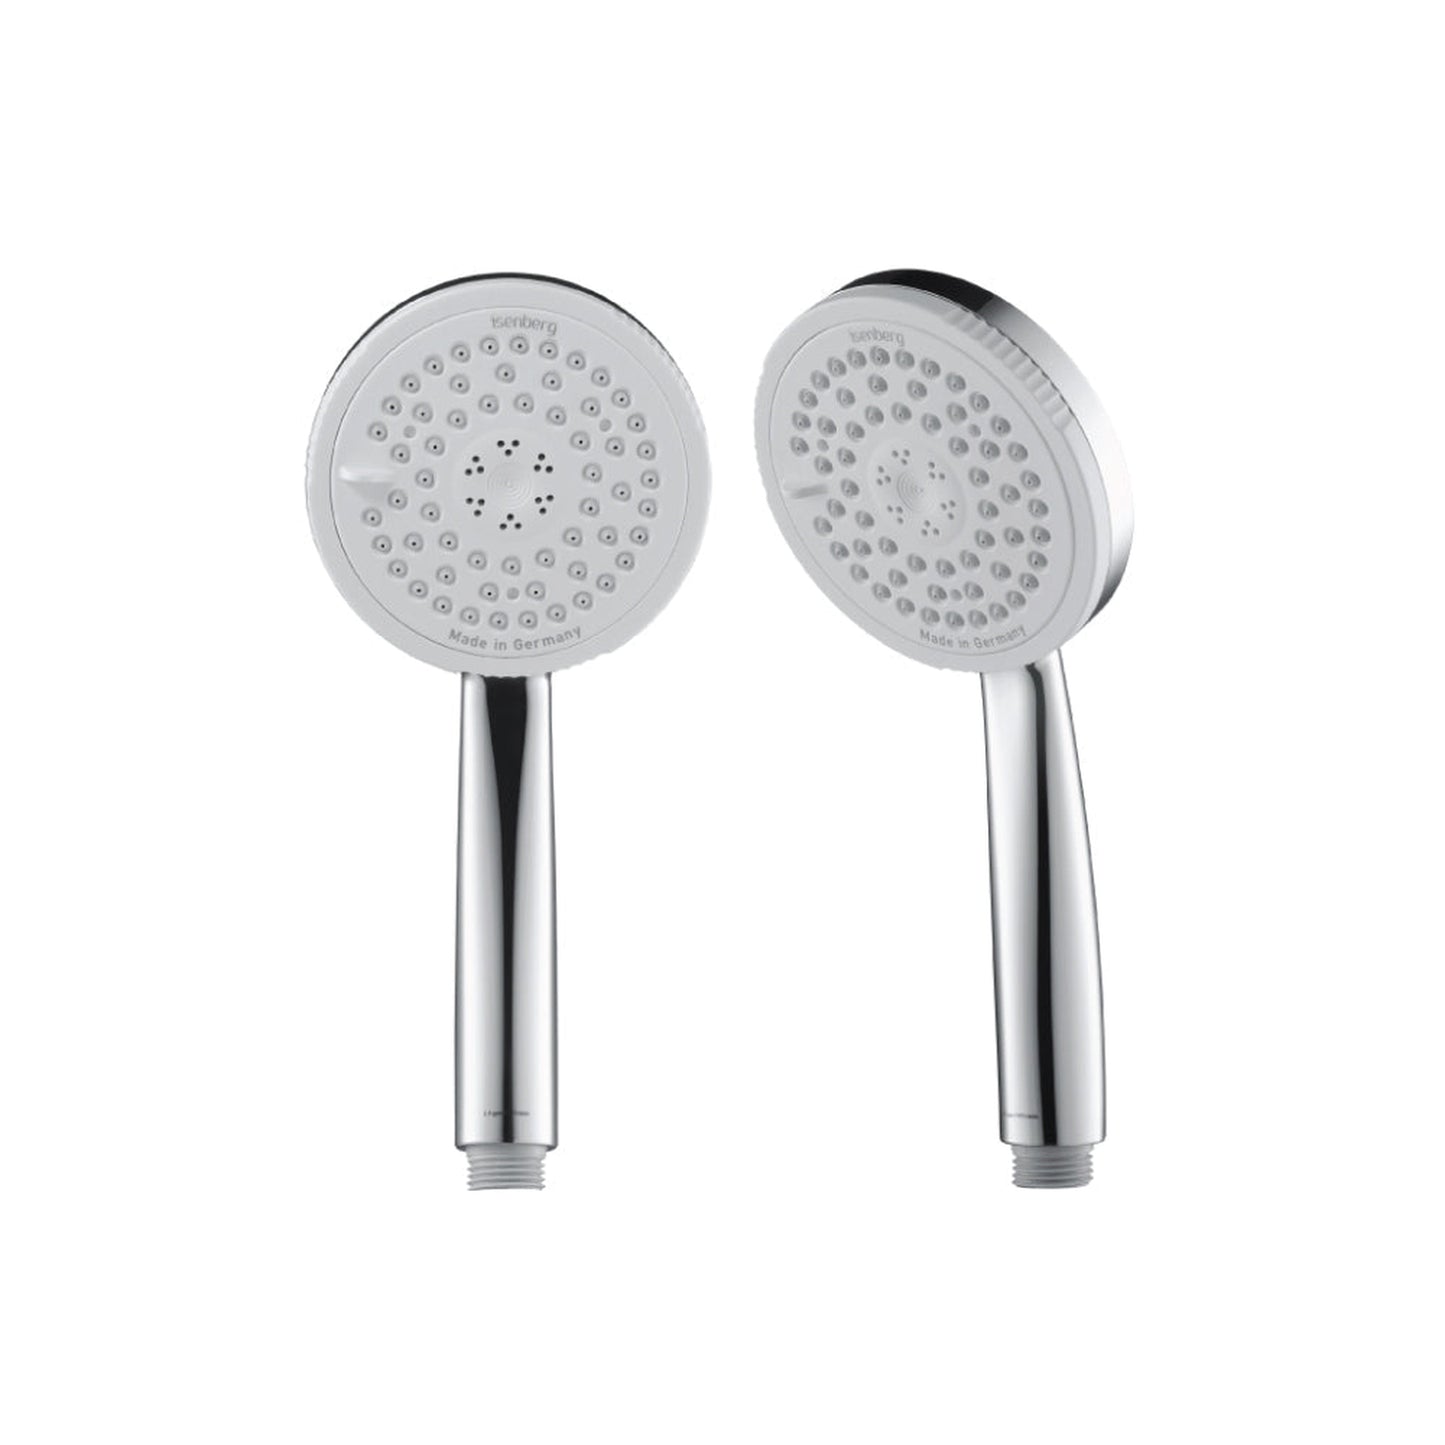 Isenberg Universal Fixtures Multi-Function ABS Hand Held Shower Head in Chrome (HS6160CP)